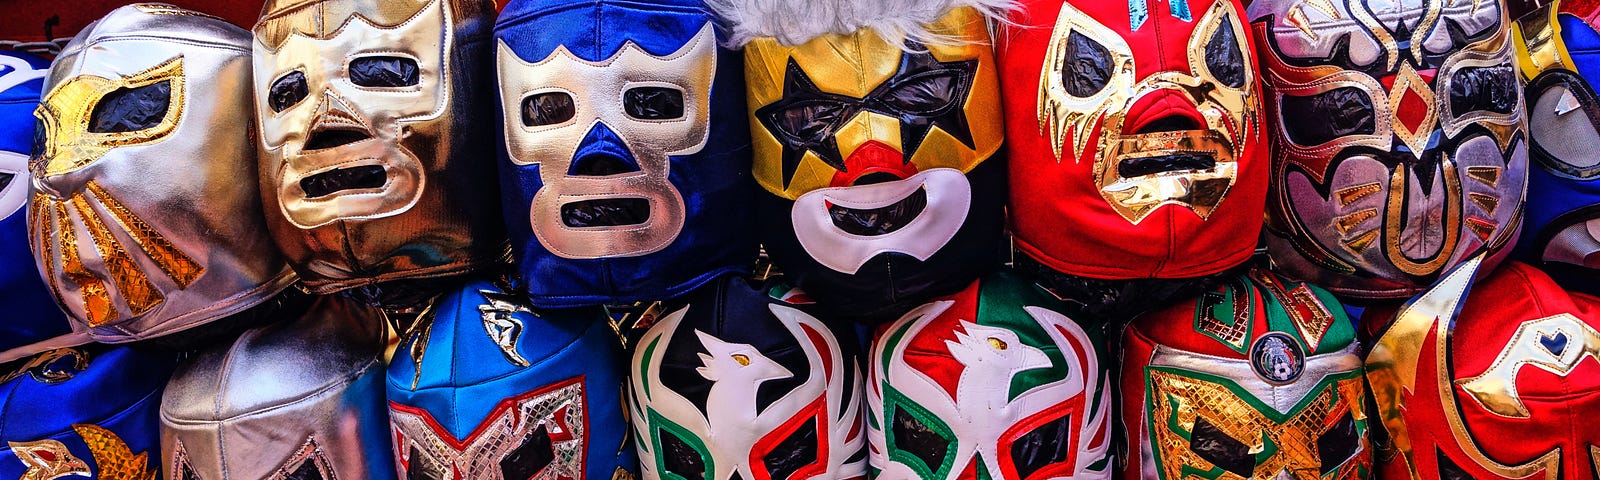 A booth in a mexican flea market that offers numerous different wrestling masks.